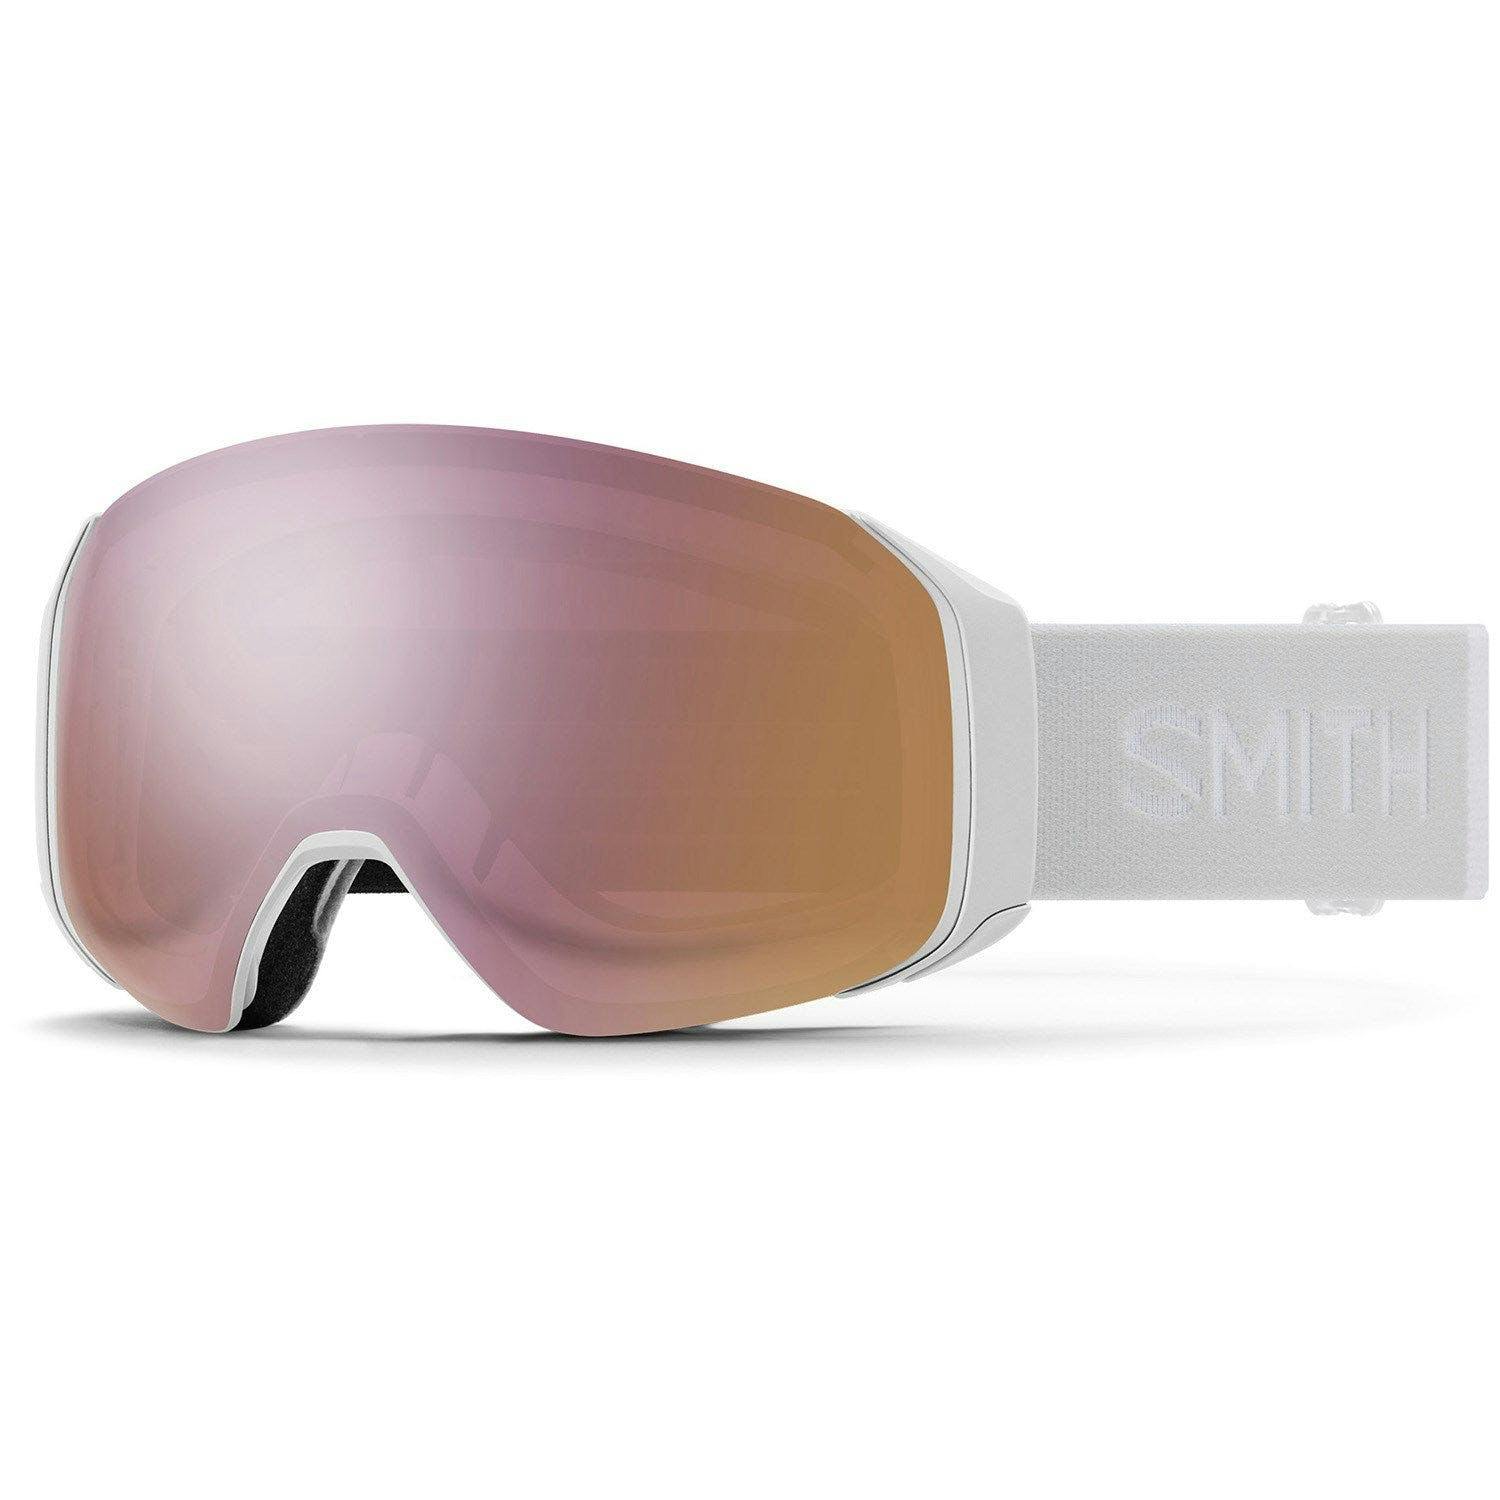 Smith 4d MAG S Goggles